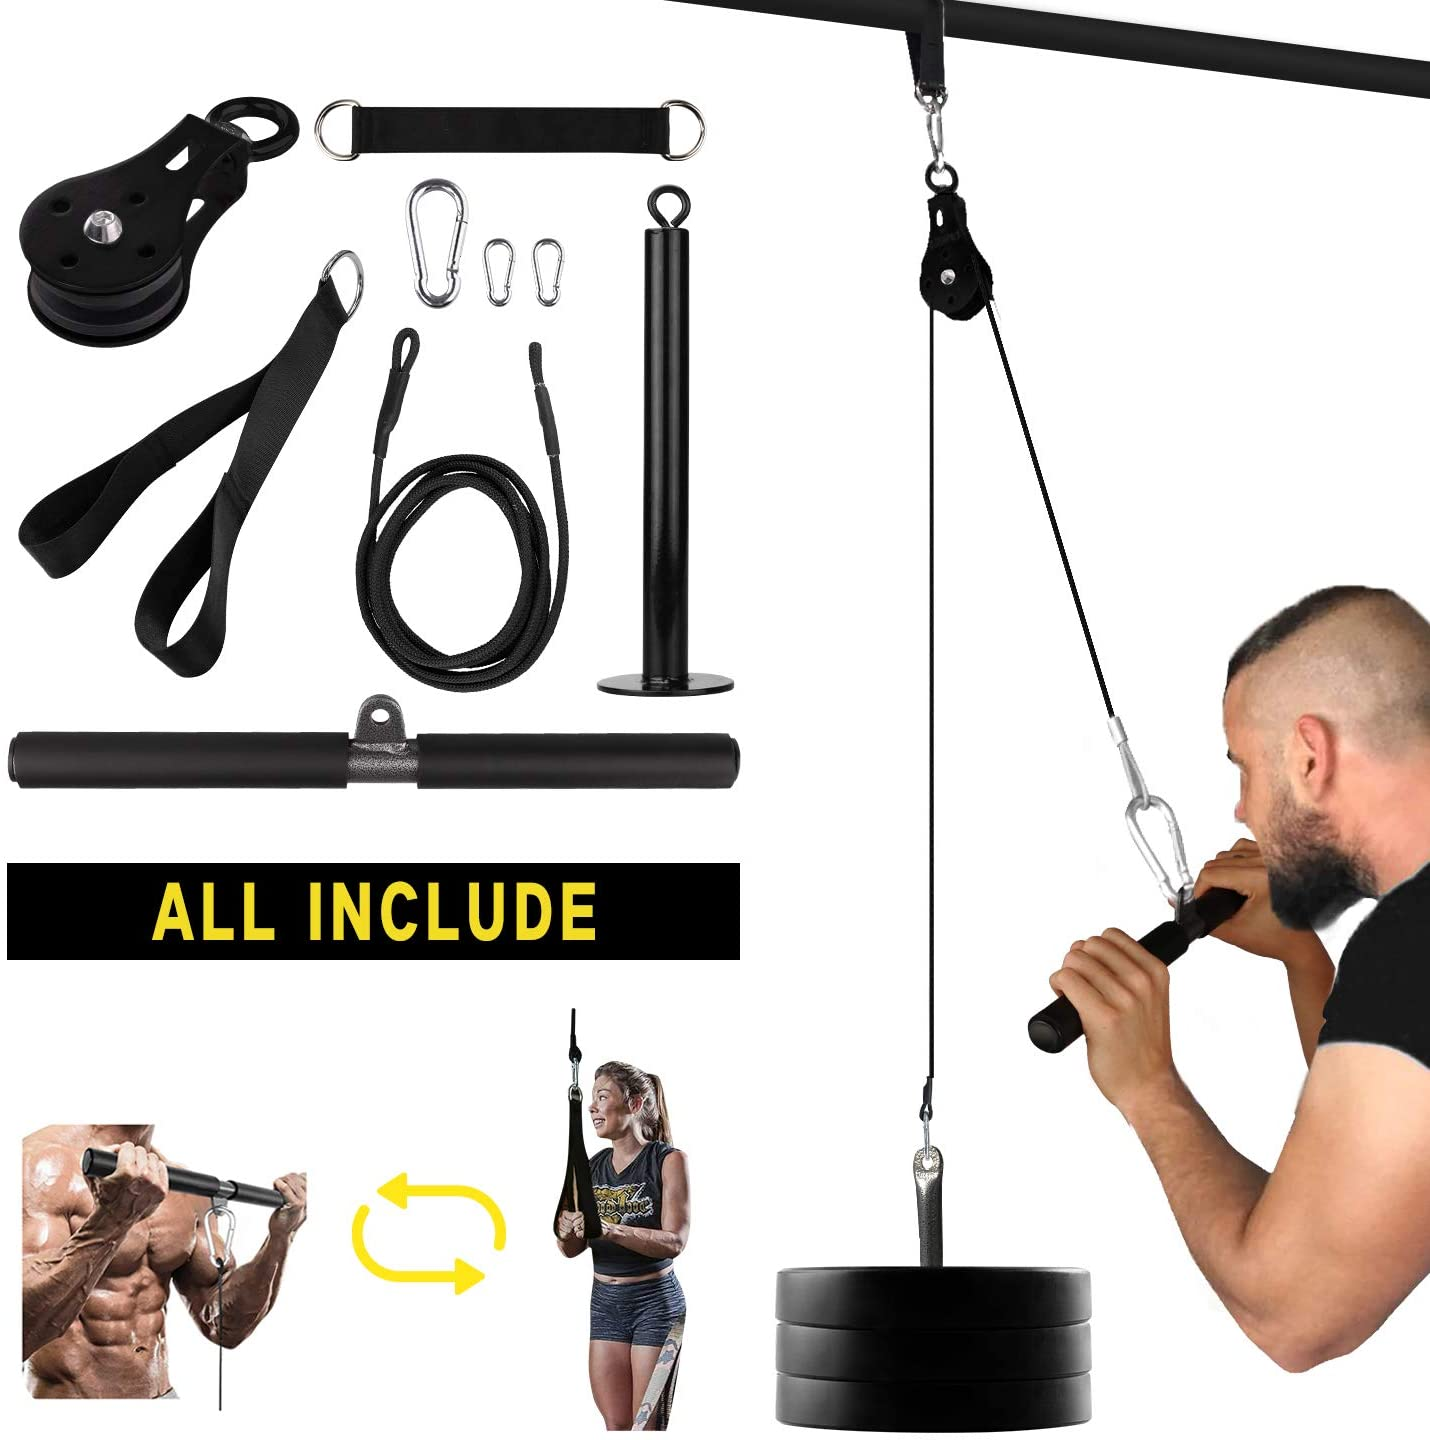 ARCHON Fitness Single Pulley Cable Station is cheaply made meant for short-term use